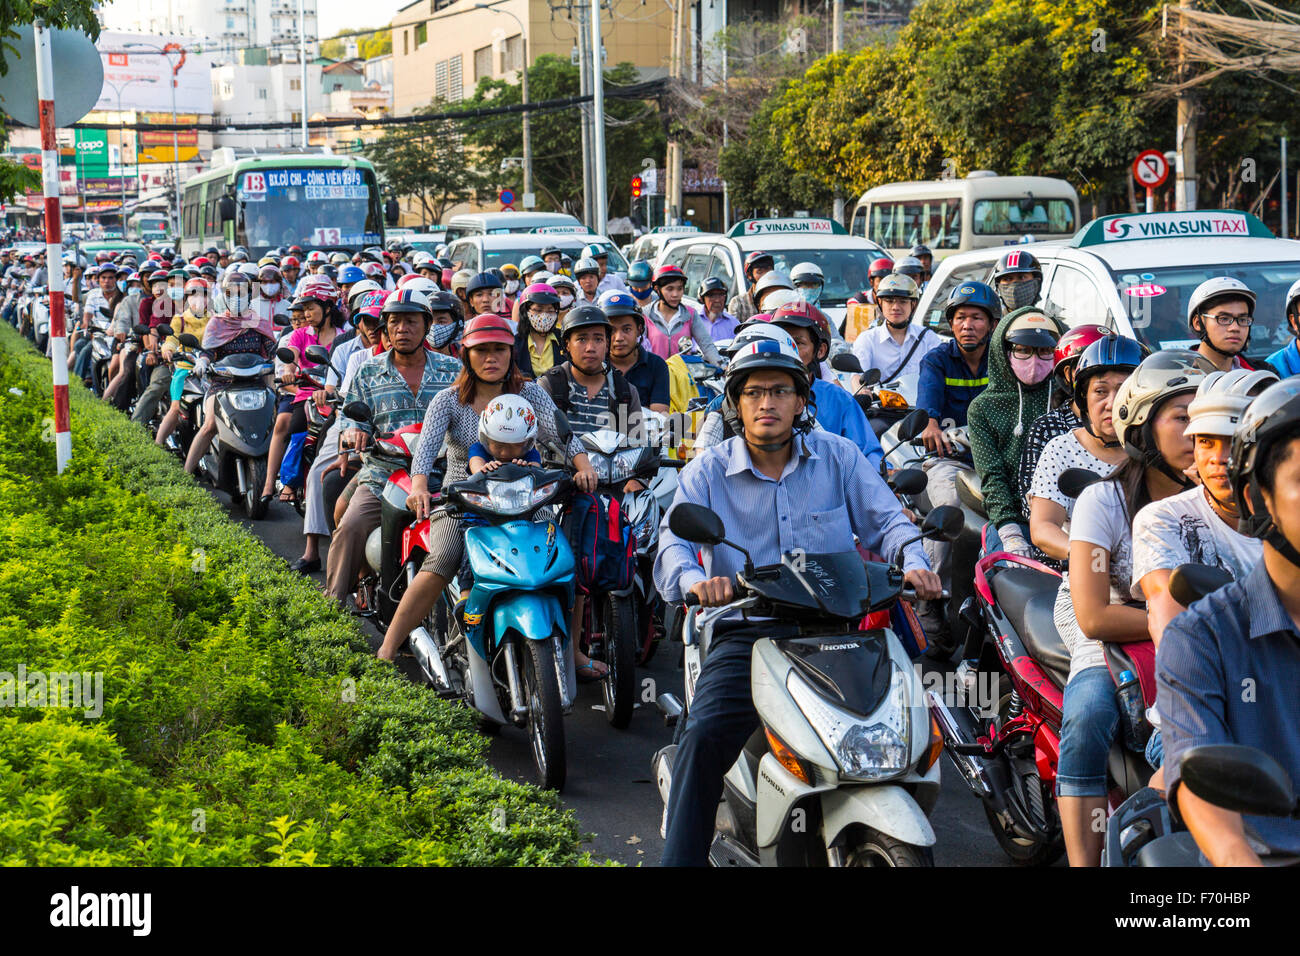 HO-CHI-MINH-CITY, VIETNAM - March 06, 2015: A massive amount of scooters driving in one of the main streets in the center of Saigon/Ho-Chi-Minh-City. It is afternoon, rush hour. Stock Photo